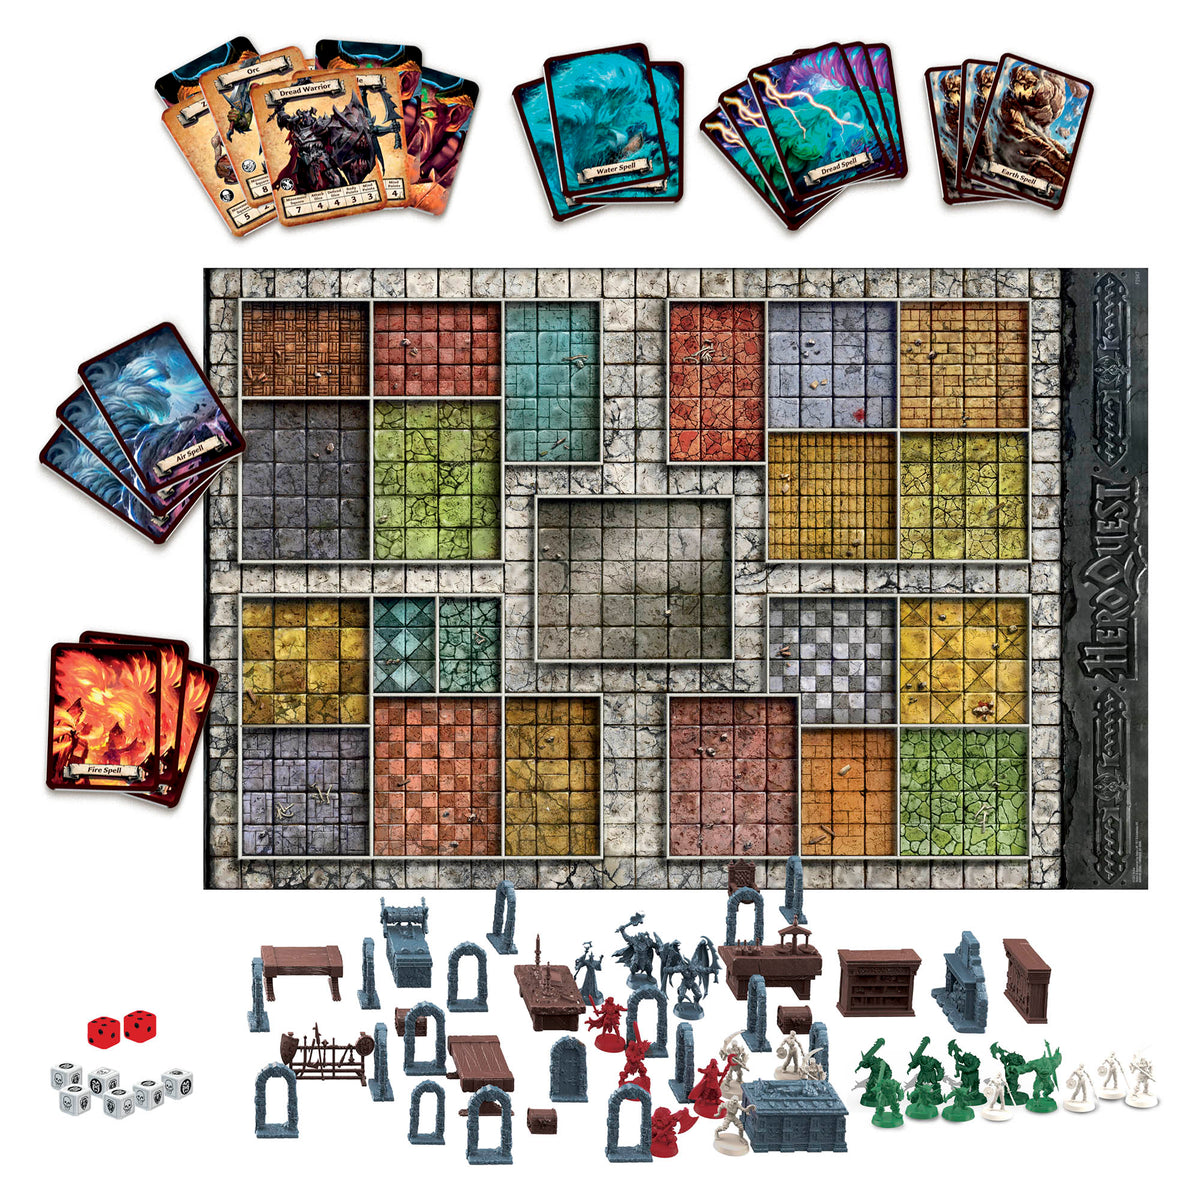 The HeroQuest board game is back from the dead, with a new project